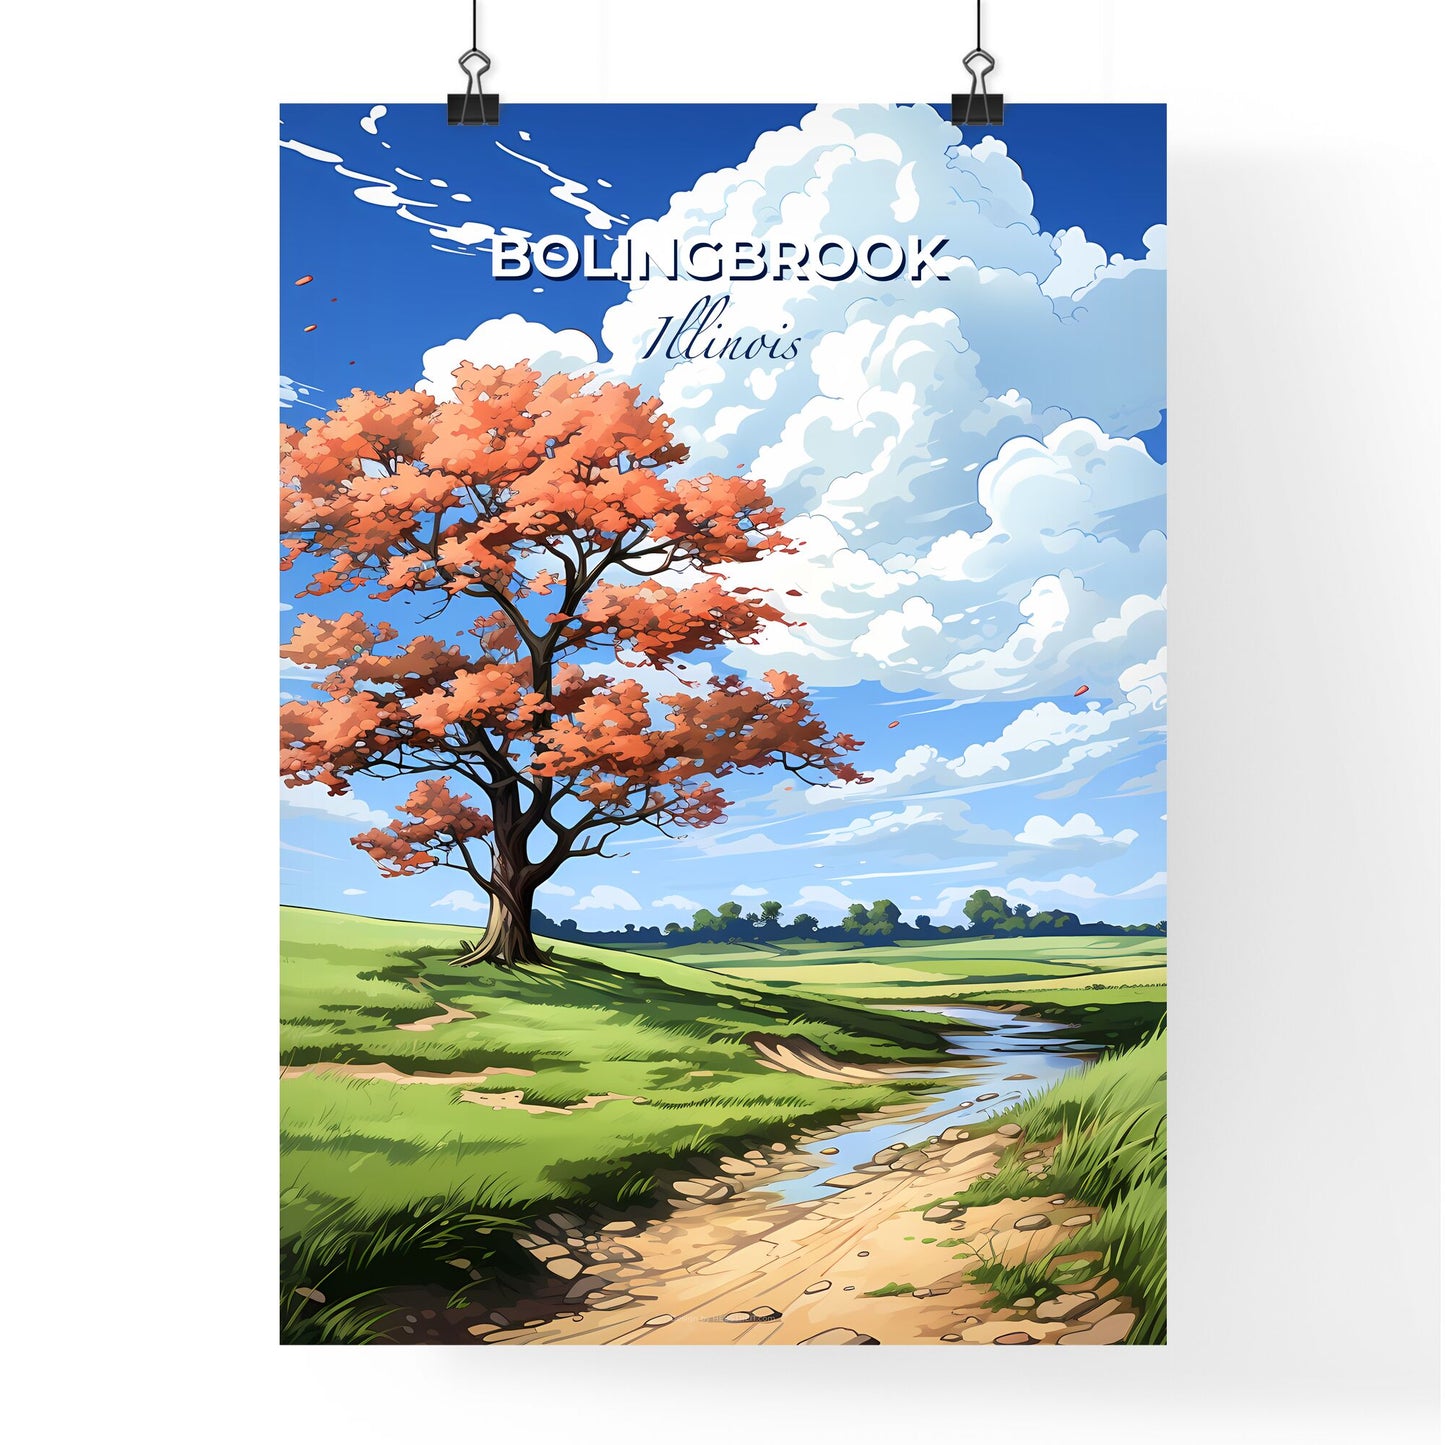 Bolingbrook, Illinois, A Poster of a tree in a grassy field Default Title